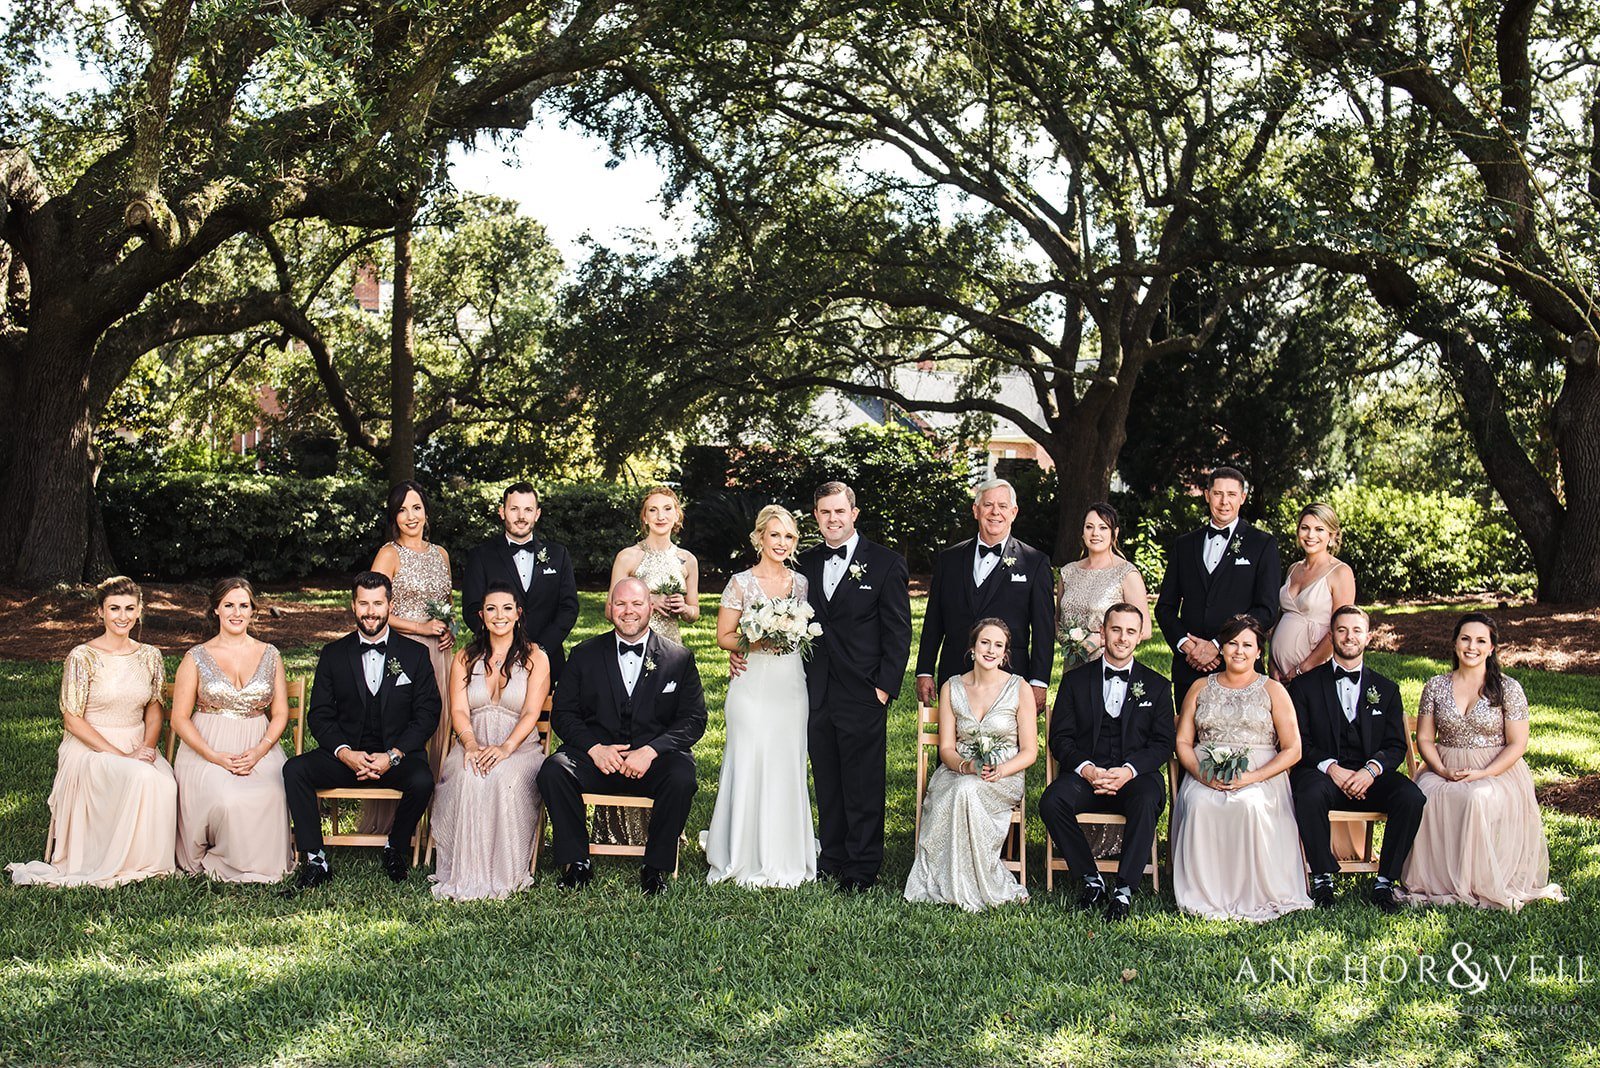 The bridal party at the Lowndes Grove Plantation Wedding